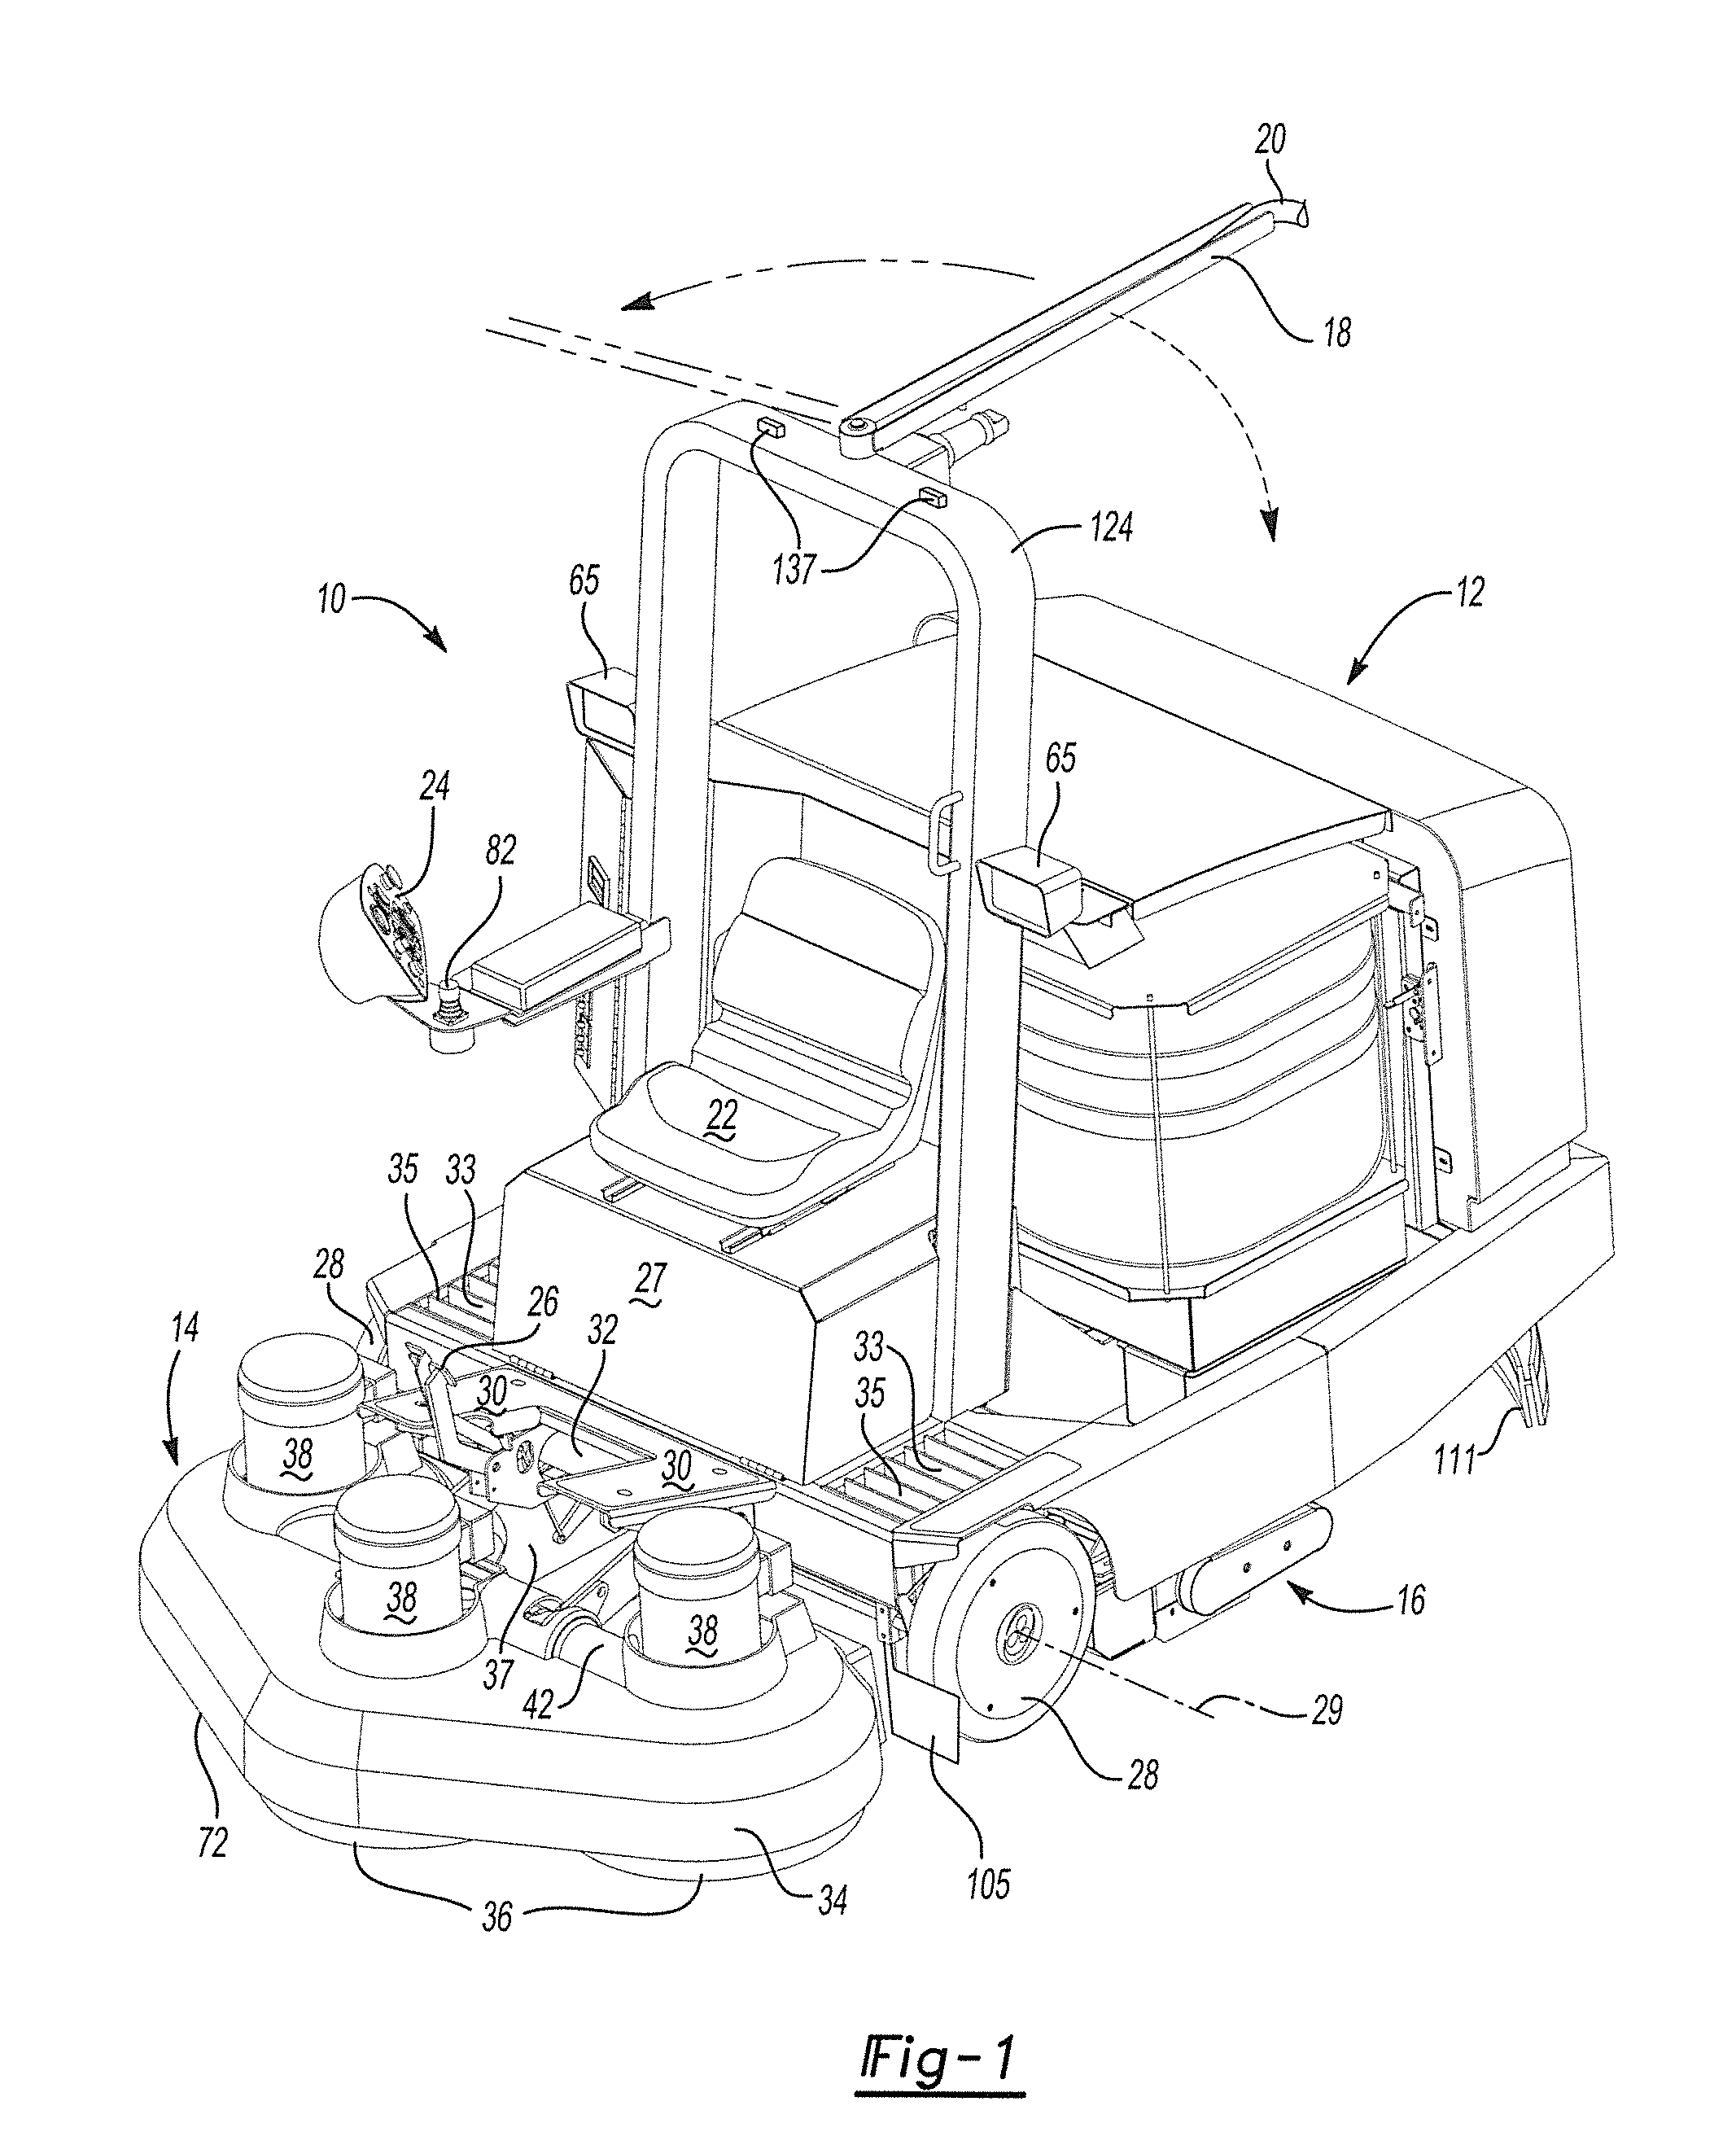 Riding apparatus for polishing and cleaning floor surfaces